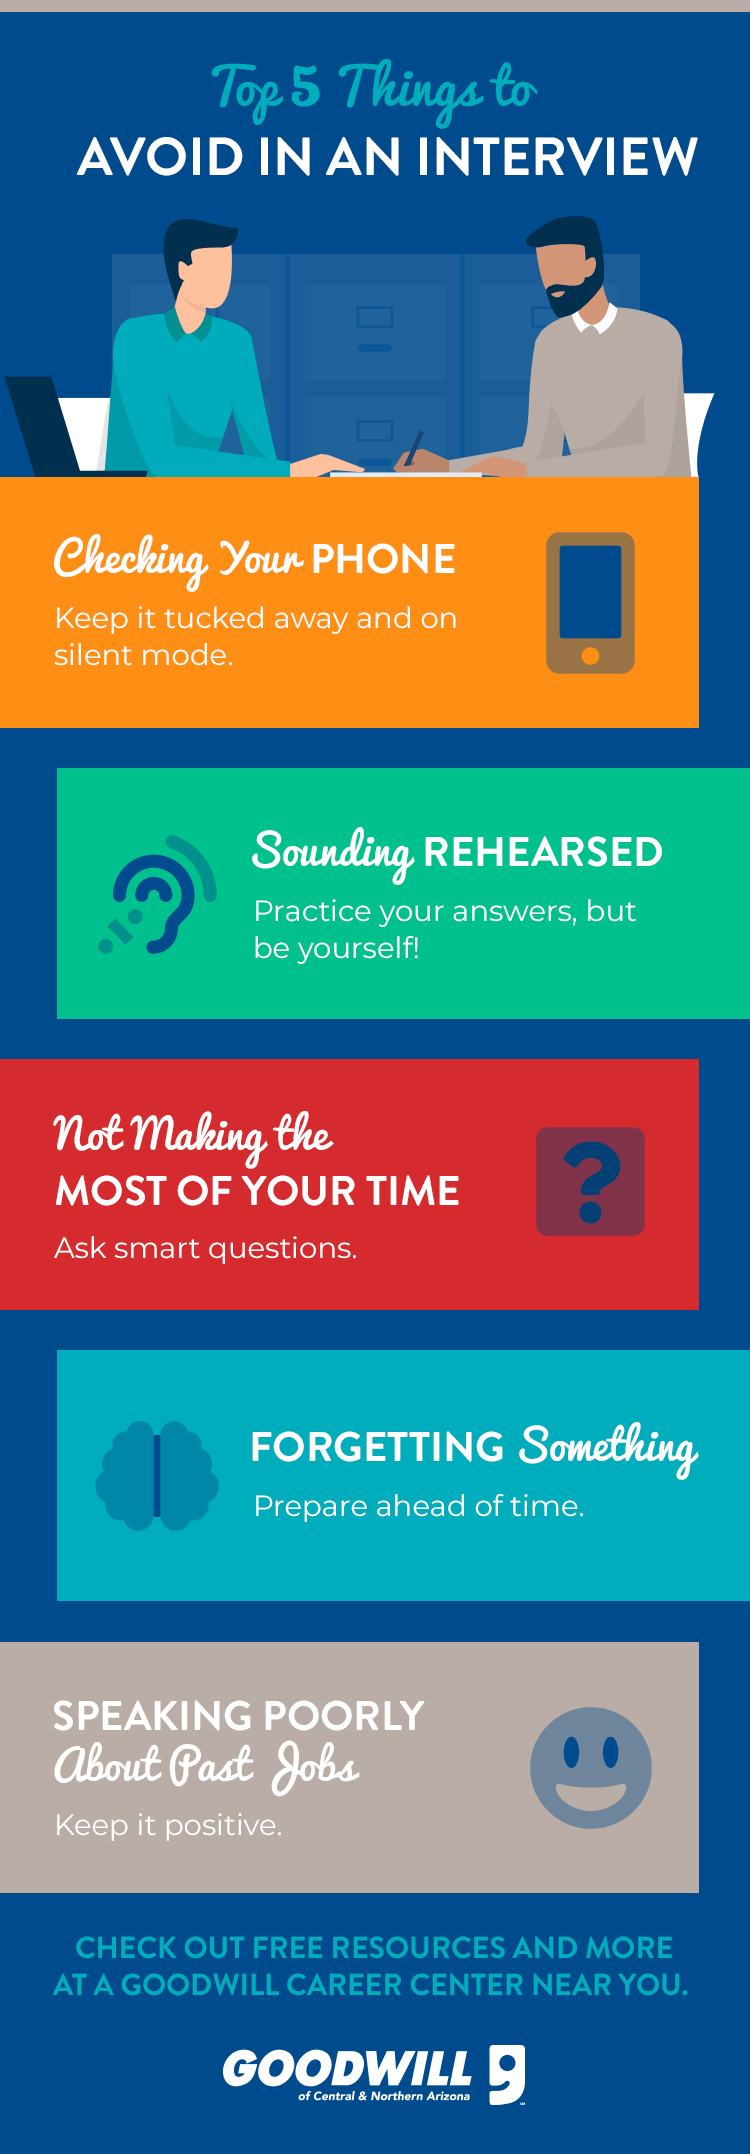 Top 5 Things to Avoid in an Interview [infographic]